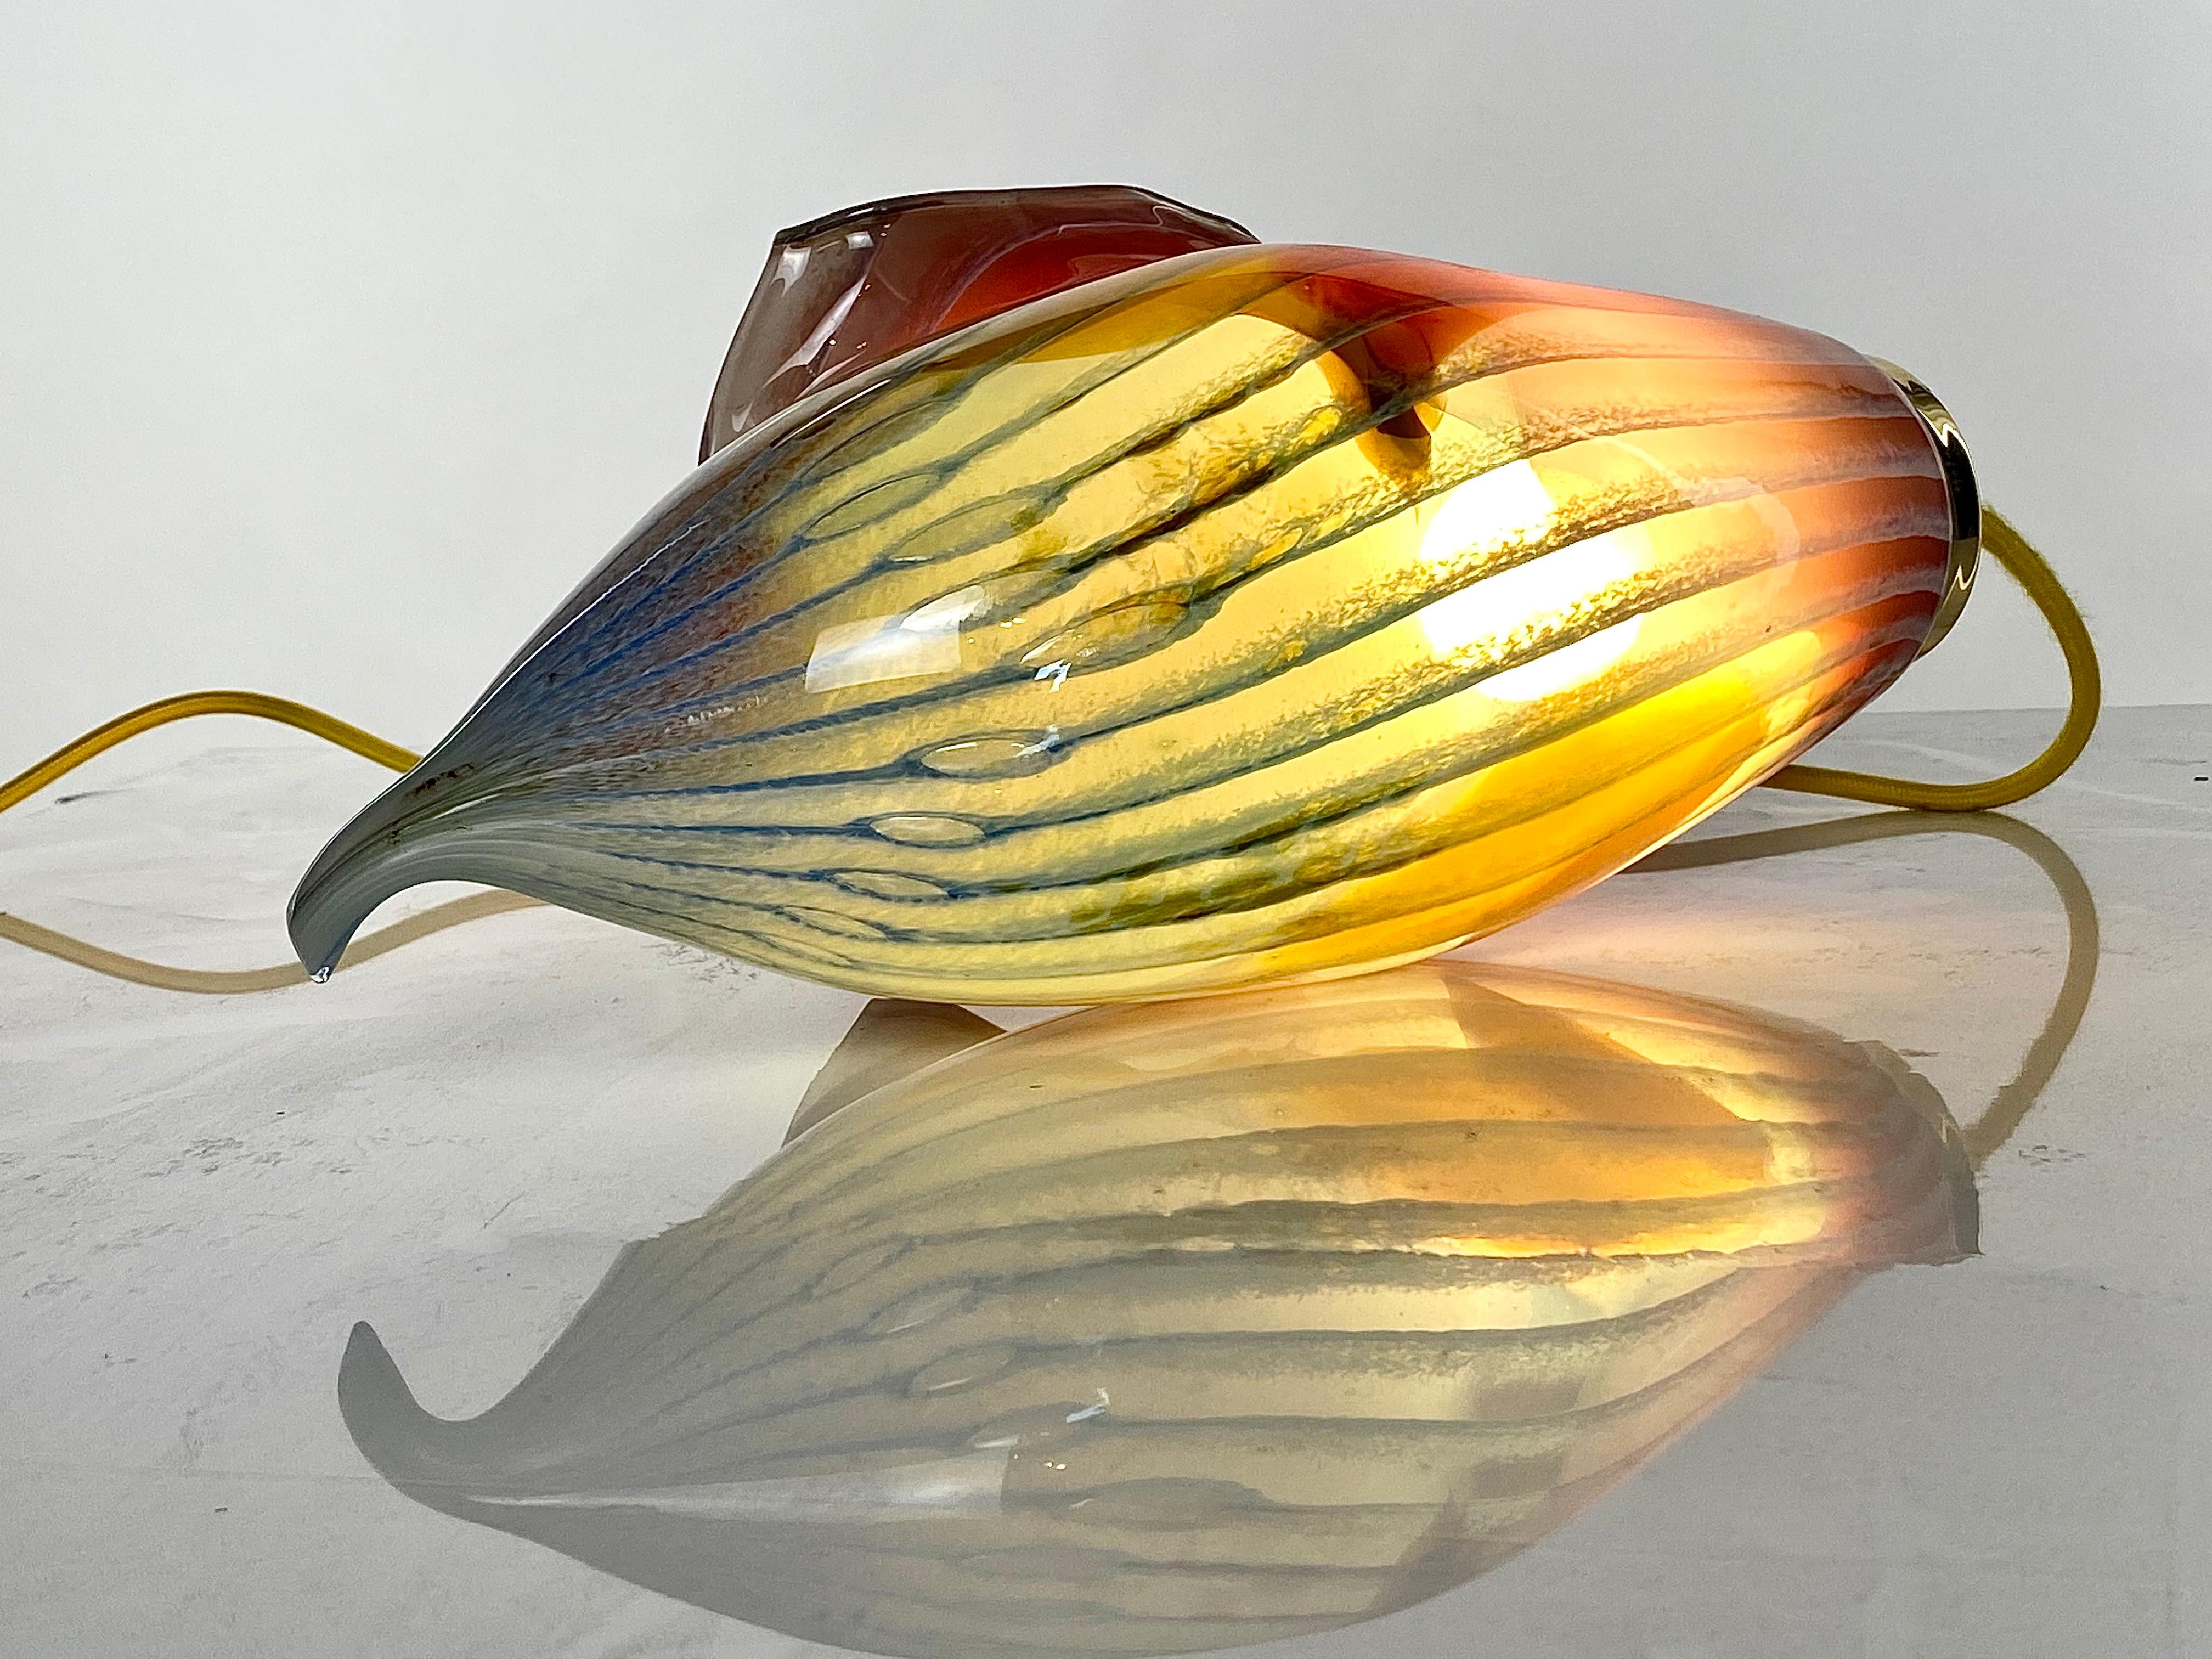 Blown Glass Table Lamp or Pendent Light, 21st Century by Mattia Biagi For Sale 2